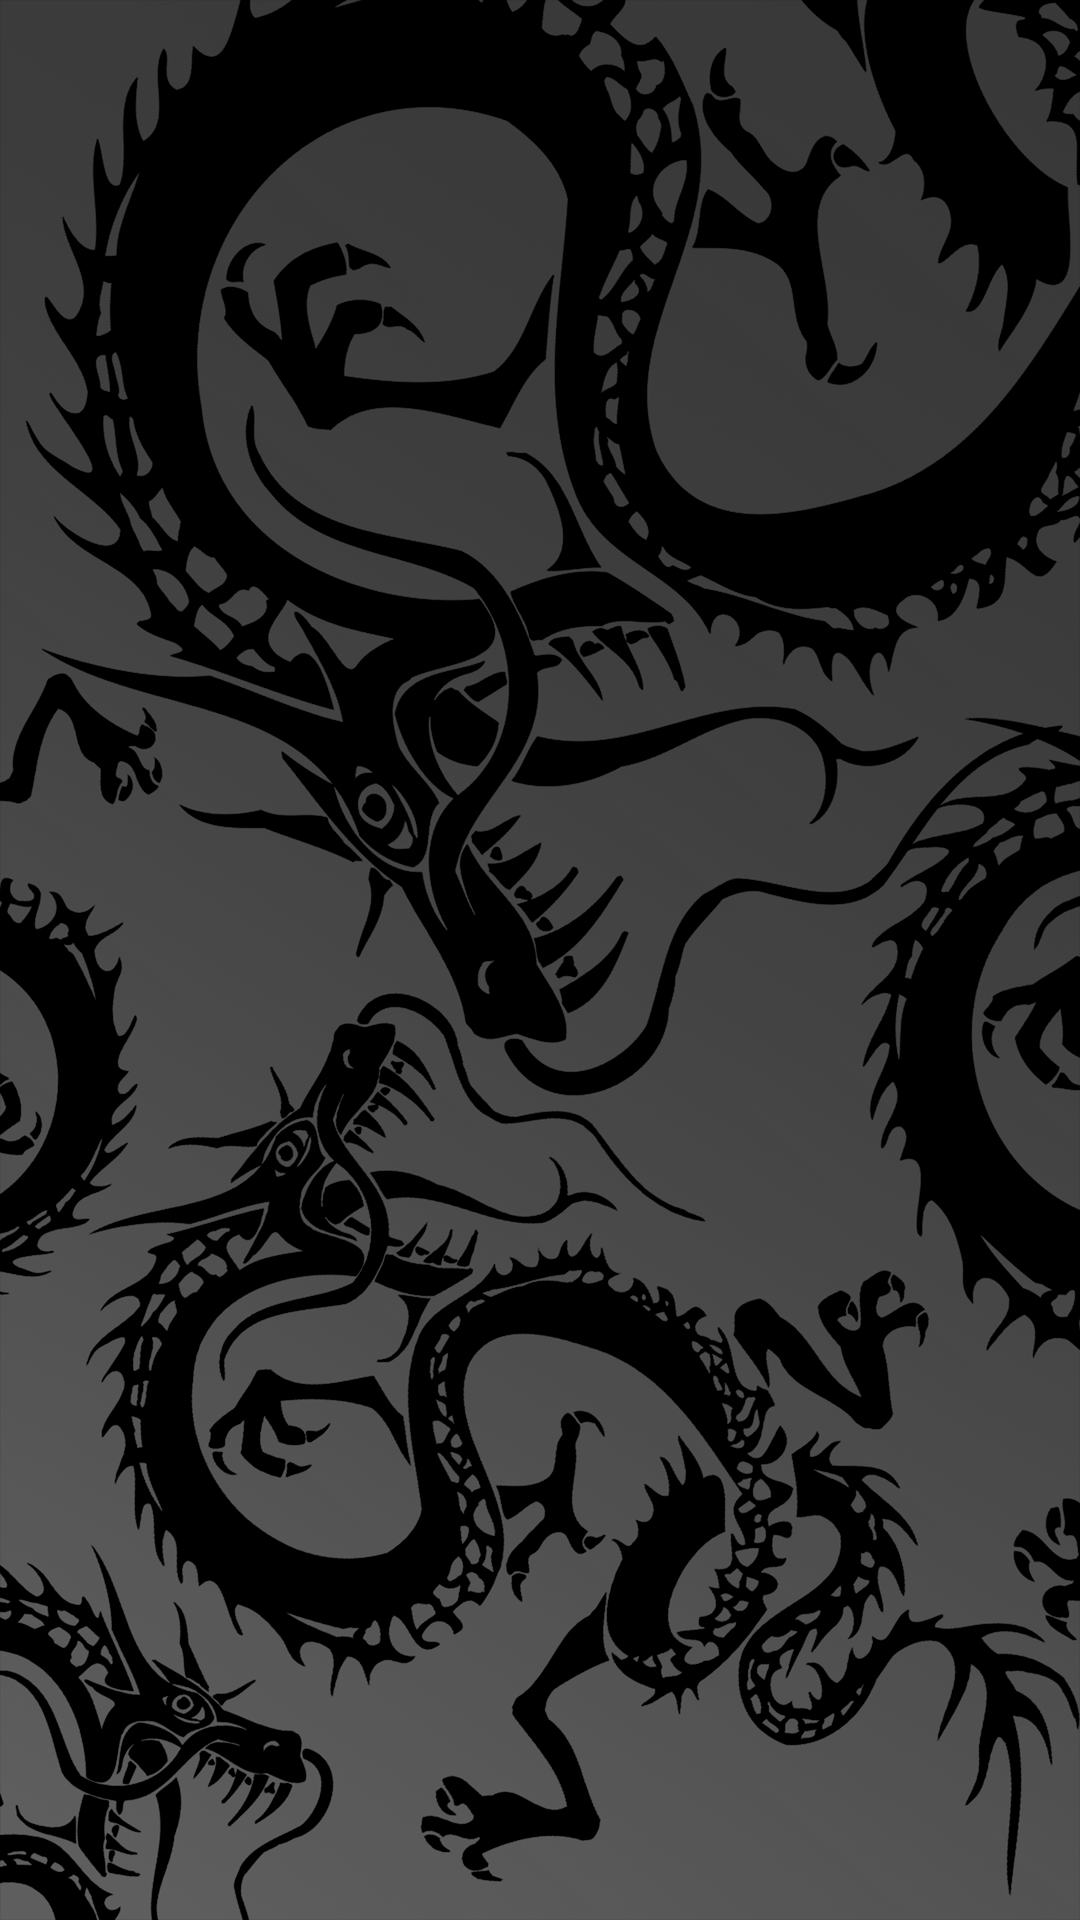 Ultra HD Black Dragon Wallpaper For Your Mobile Phone .0034